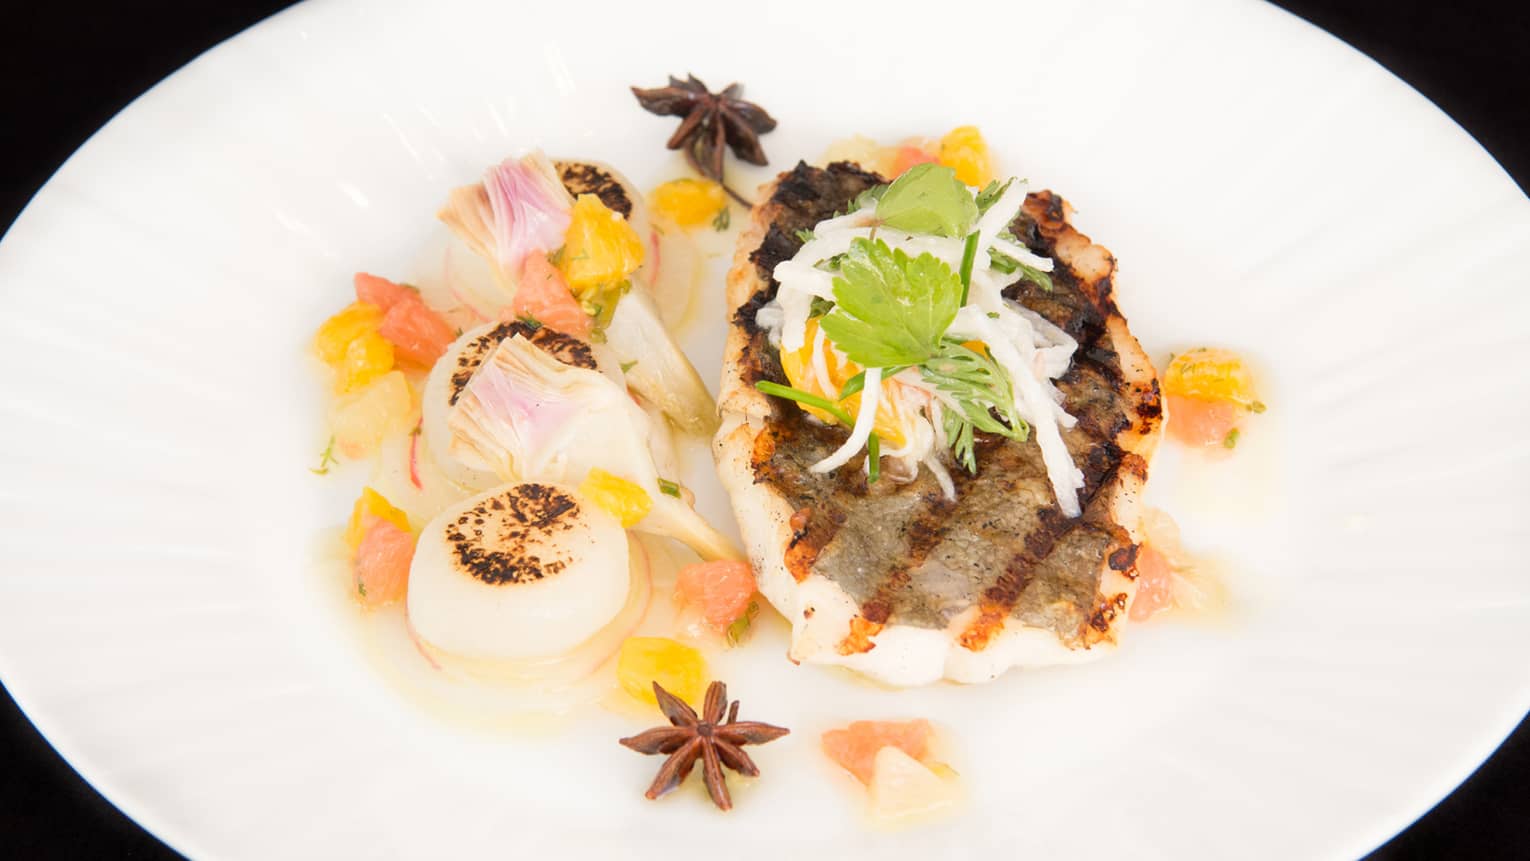 Grilled white fish filet and three seared scallops on plate with herbs, vegetable garnish